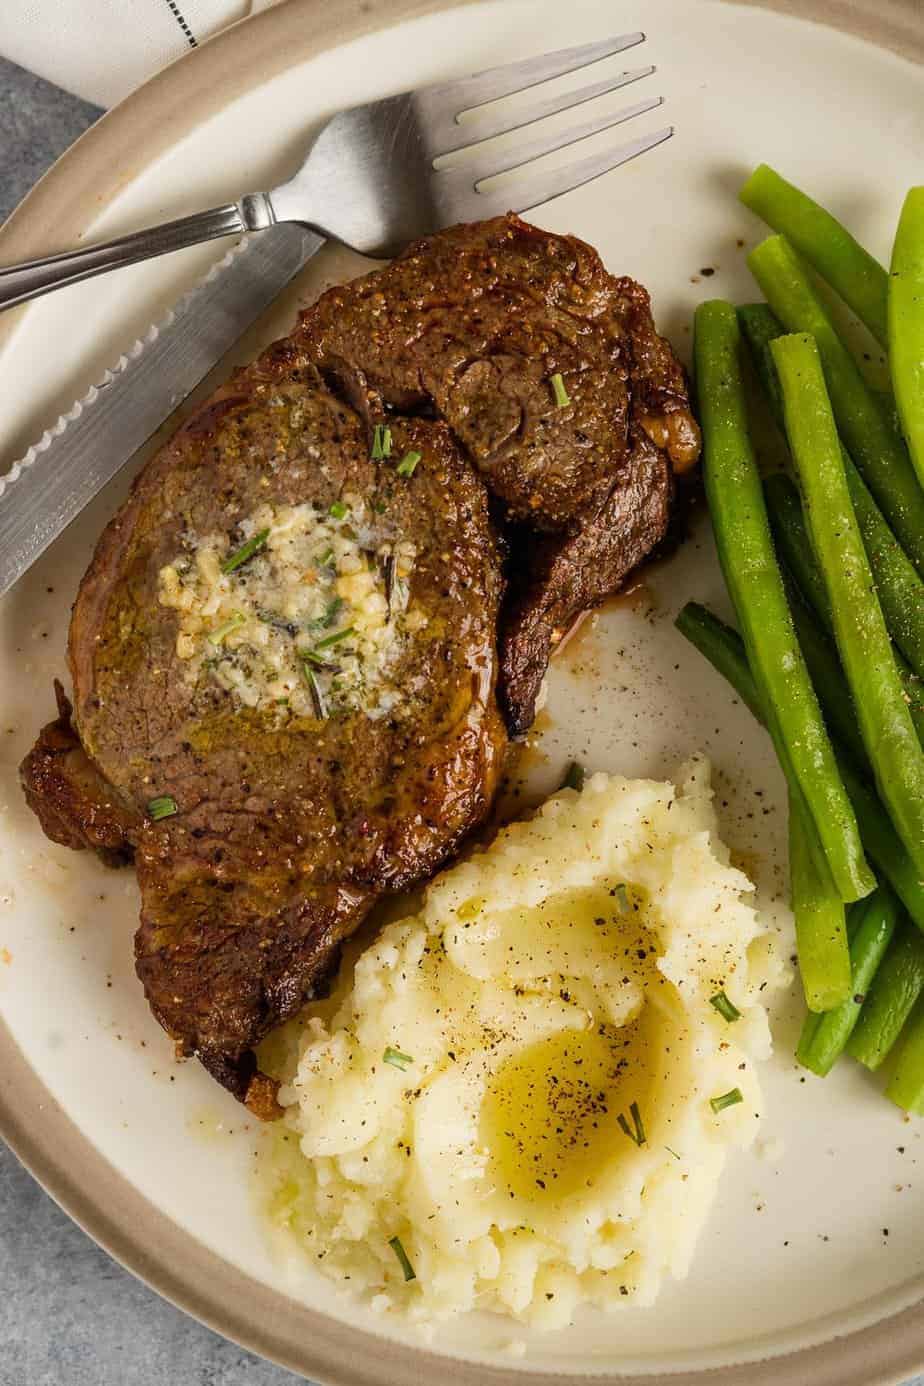 Ribeye served with sides of mashed cauliflower and green beans